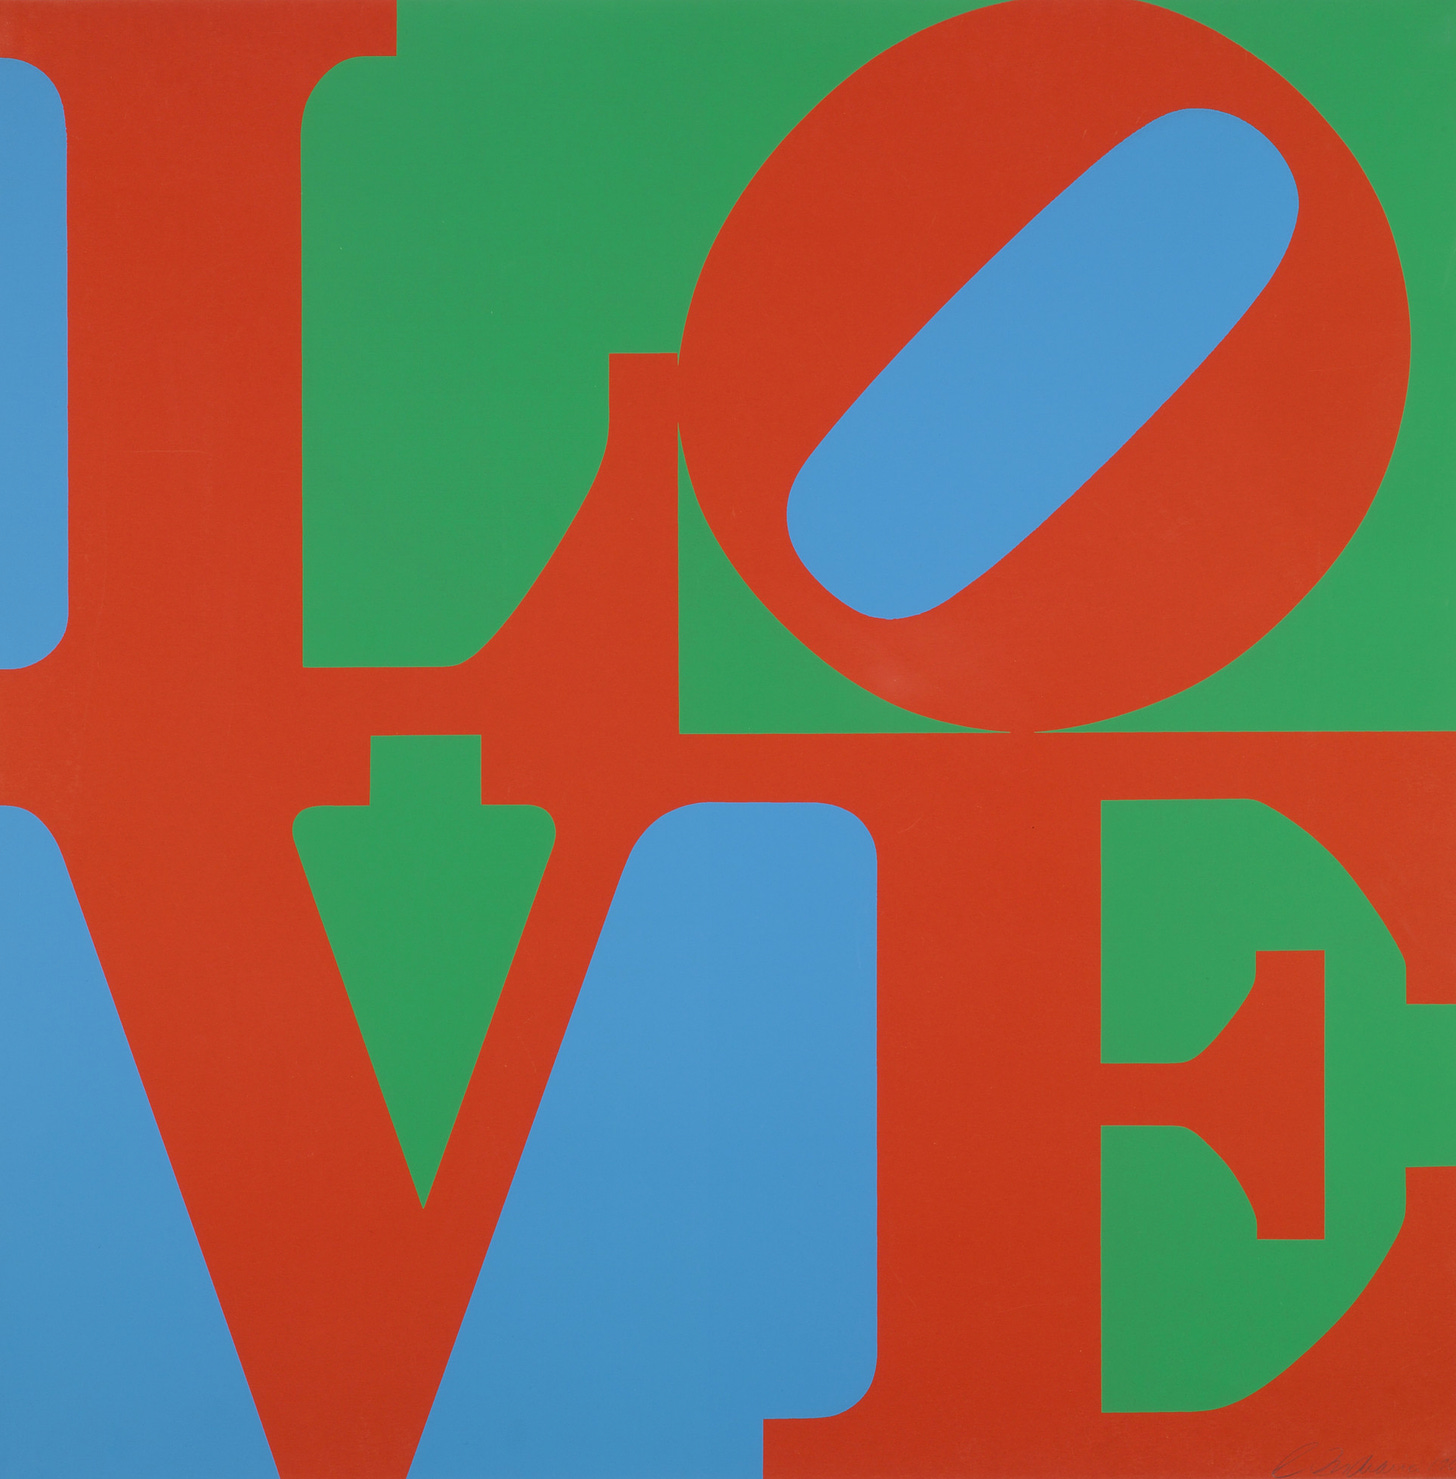 The "LOVE" artwork by Robert Indiana